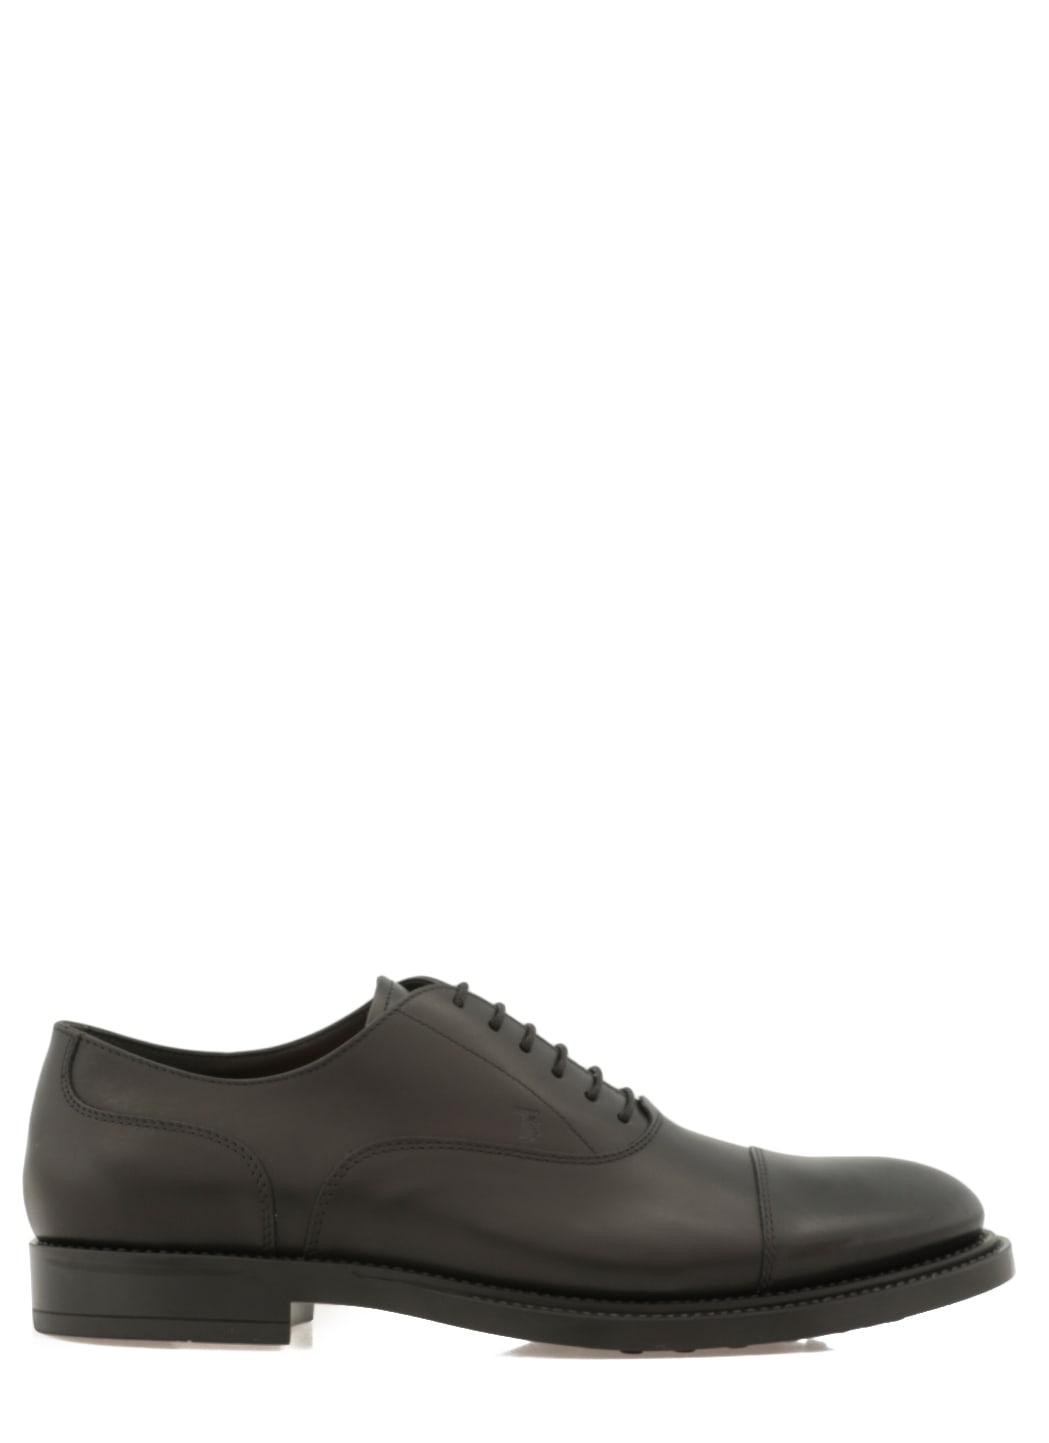 Tods Duilio Lace Up Shoes